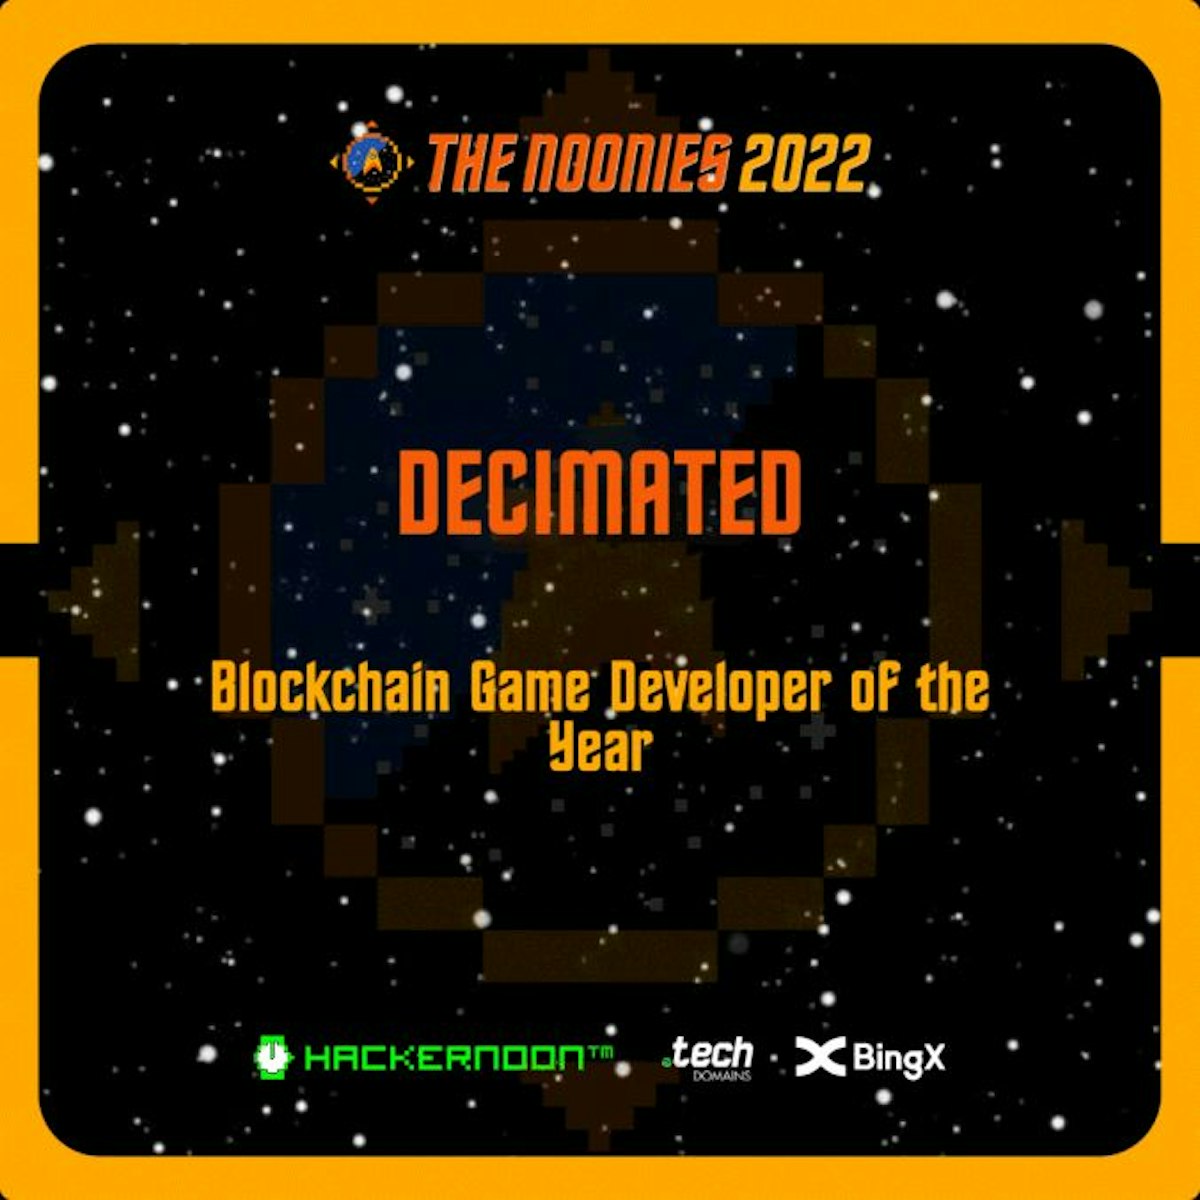 featured image - Meet Decimated, the Noonies 2022 Winner of Blockchain Game Developer of the Year 